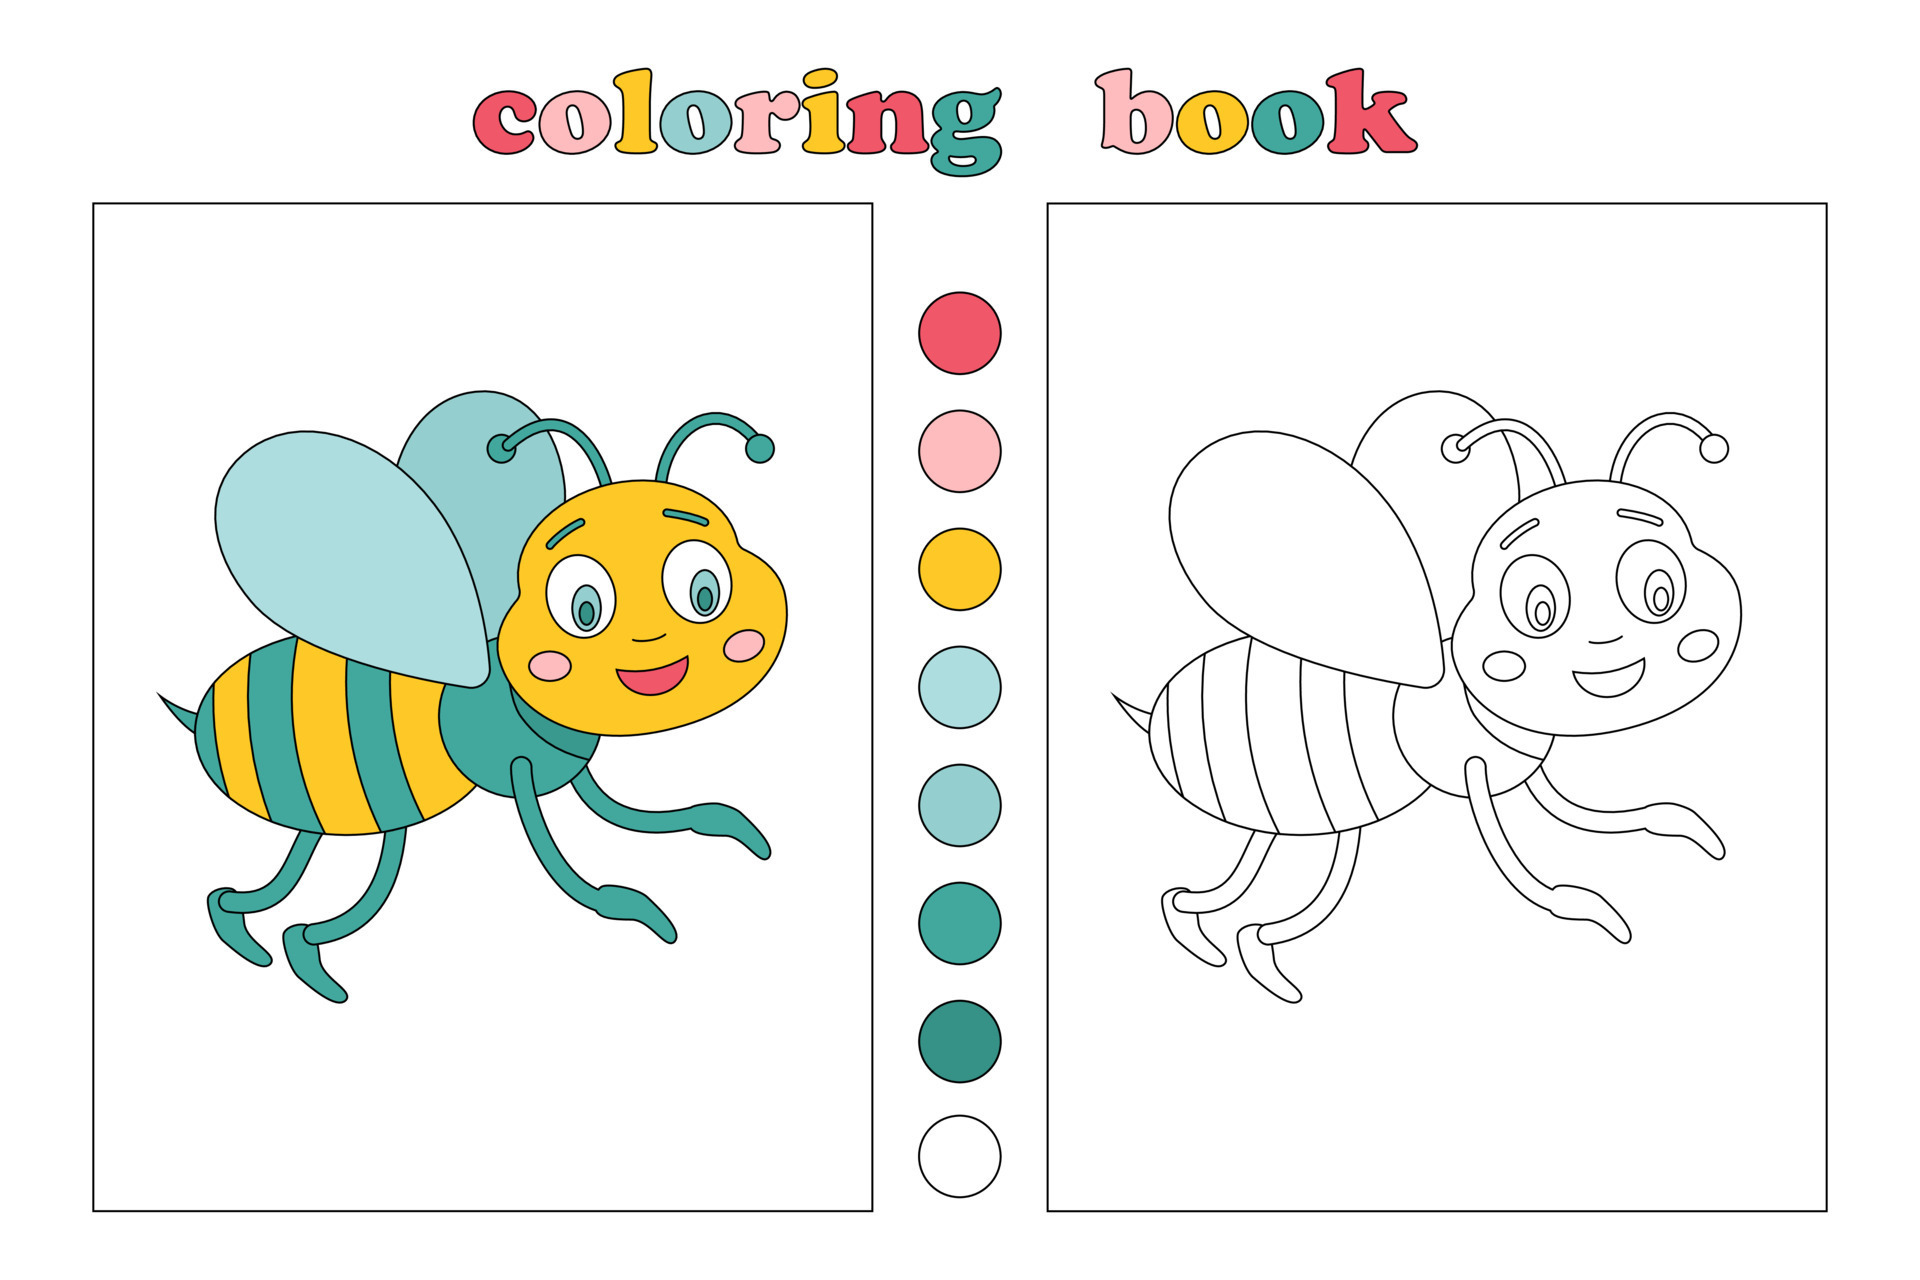 https://static.vecteezy.com/system/resources/previews/012/507/545/original/coloring-book-for-kids-coloring-page-with-small-bee-black-and-white-and-color-cartoon-illustration-with-lettering-and-color-samples-we-draw-and-play-with-children-children-education-vector.jpg